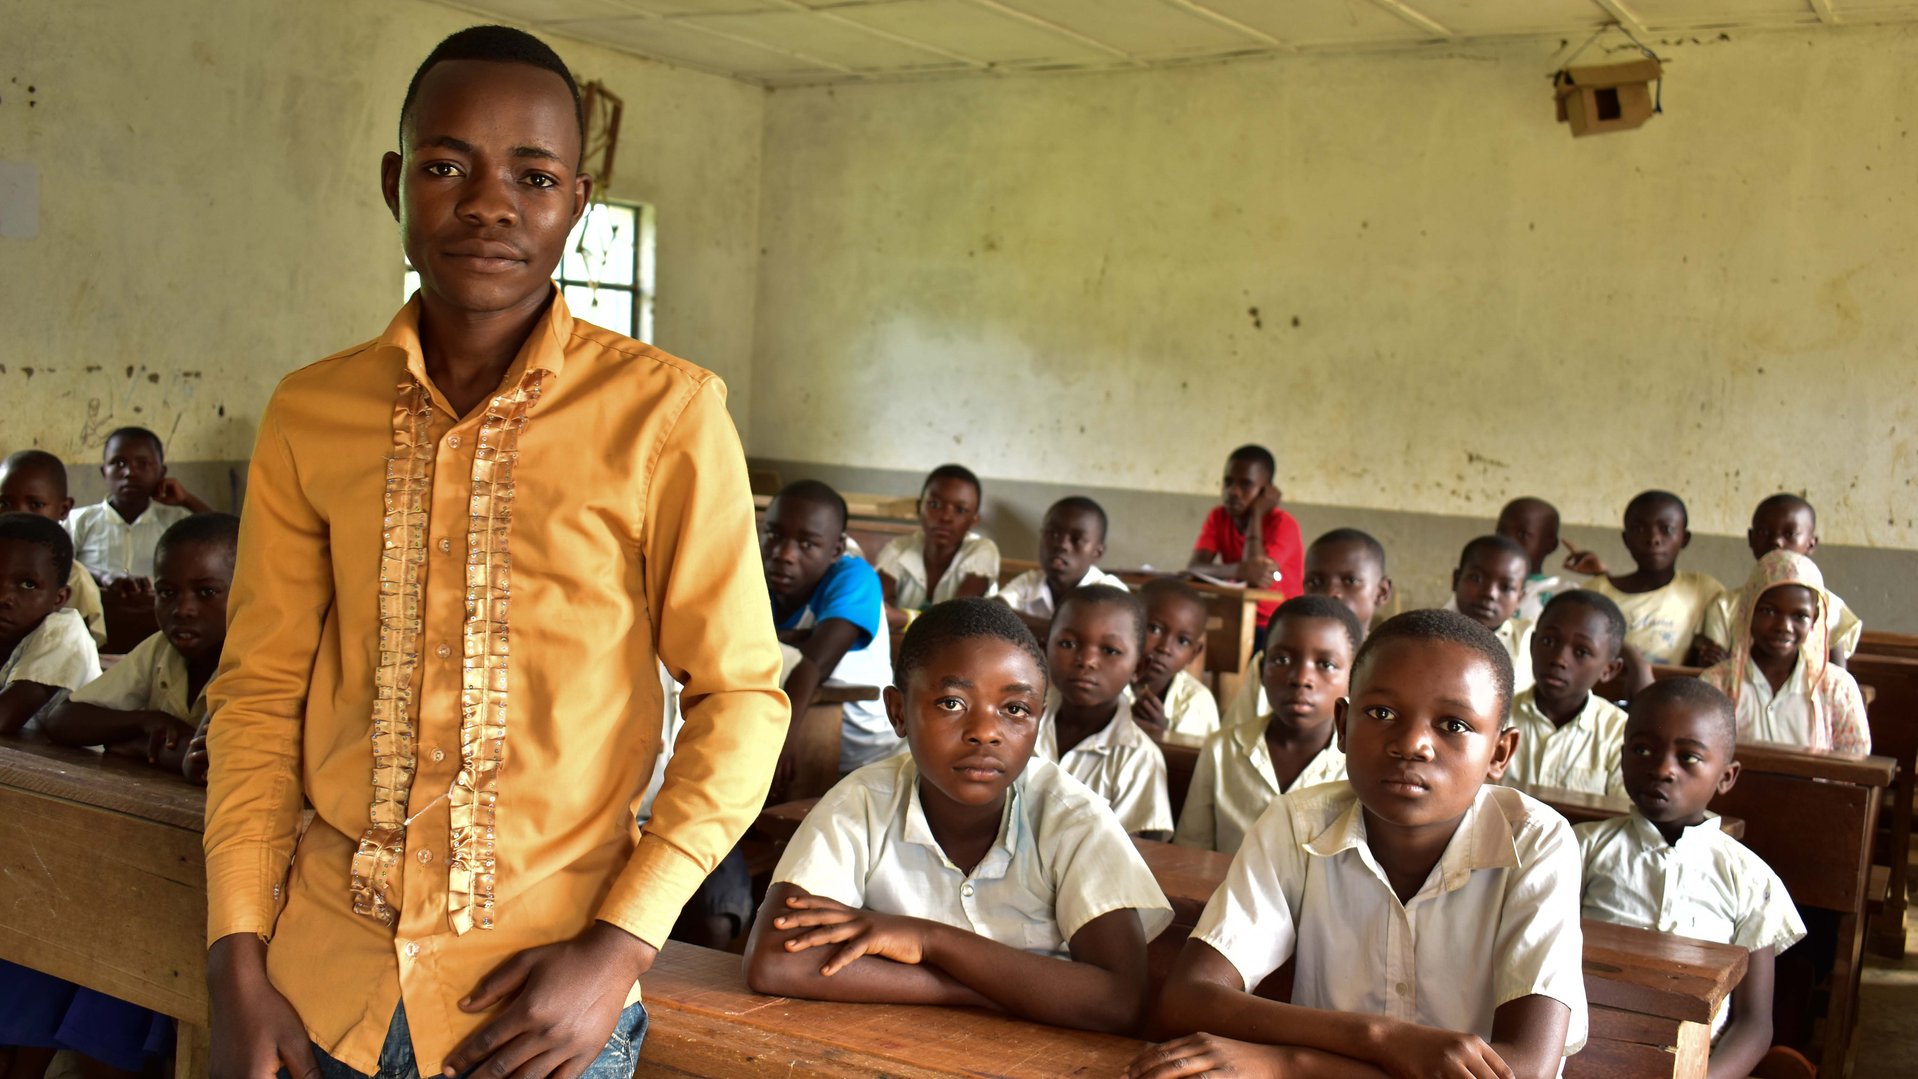 A teacher in Uganda, standing in front of the class